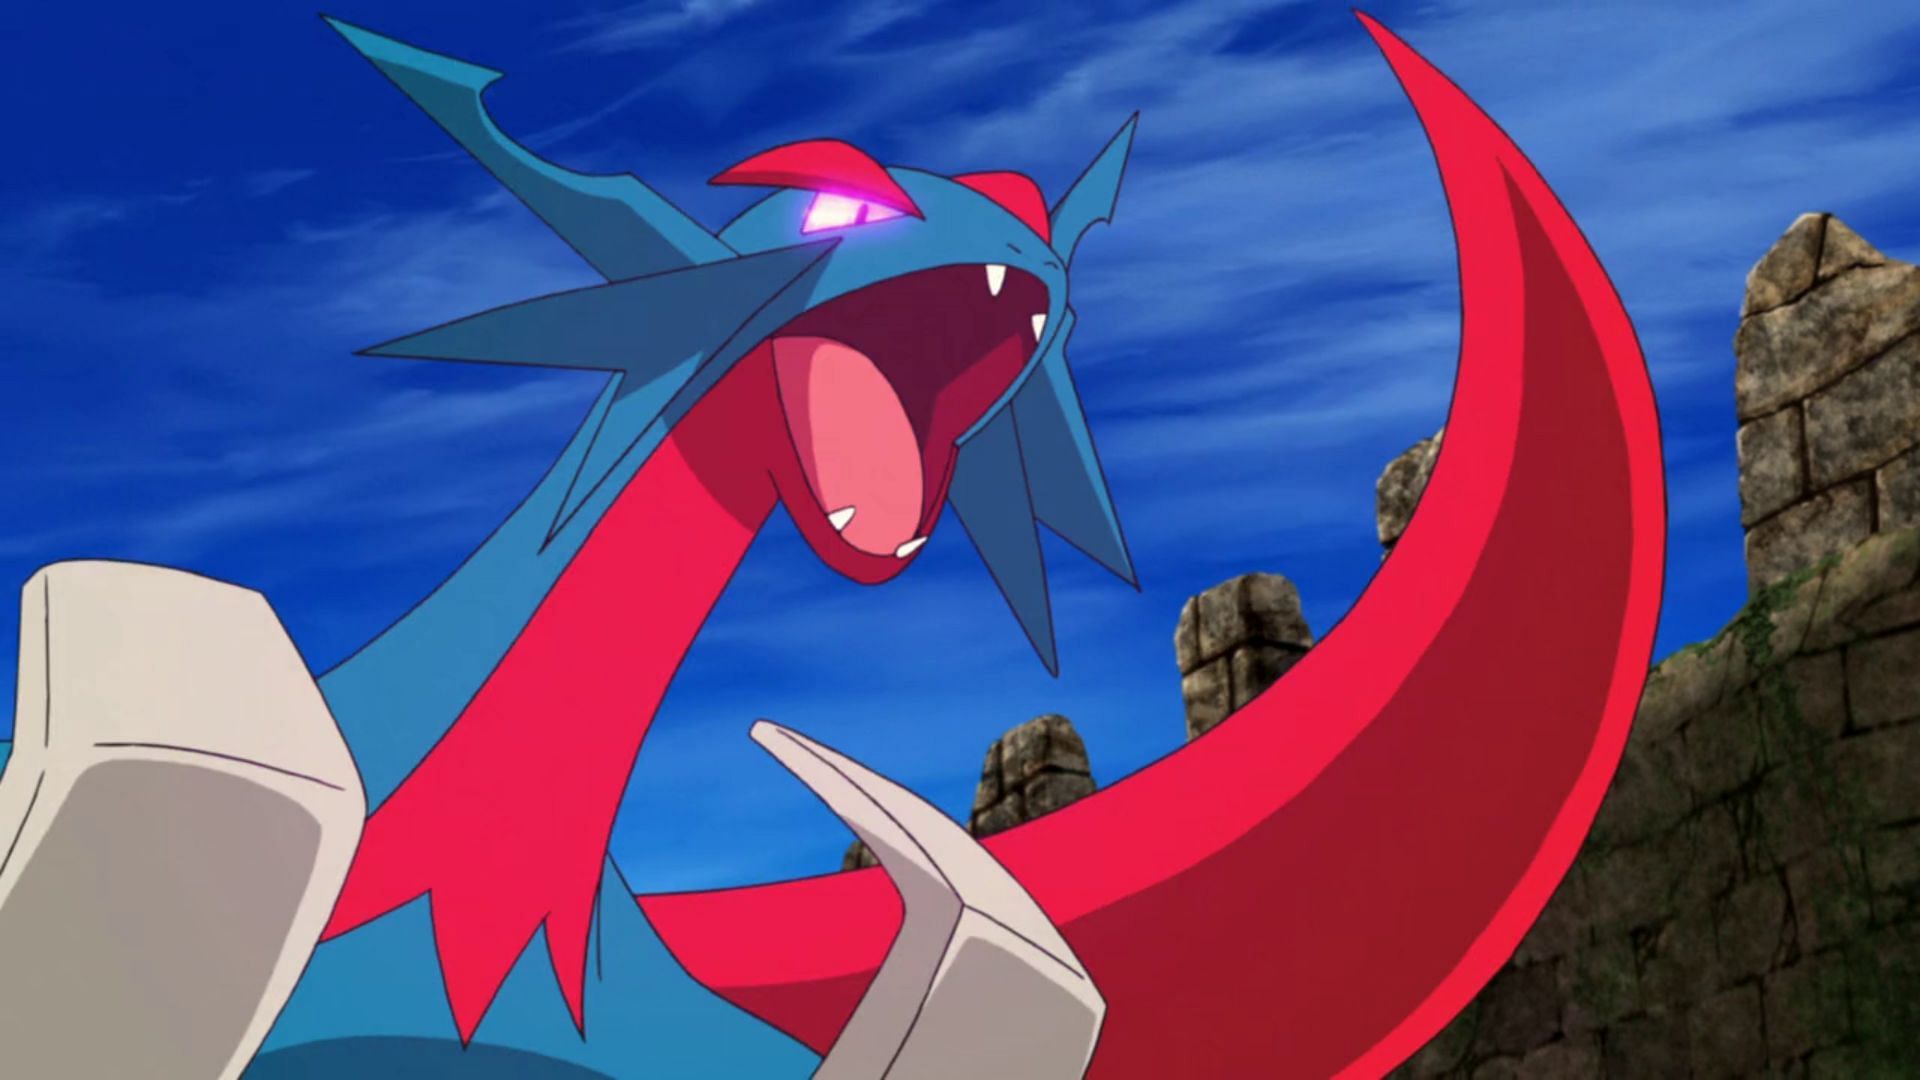 Pokemon: The Salamence Evolution Line is the Perfect Trans Allegory